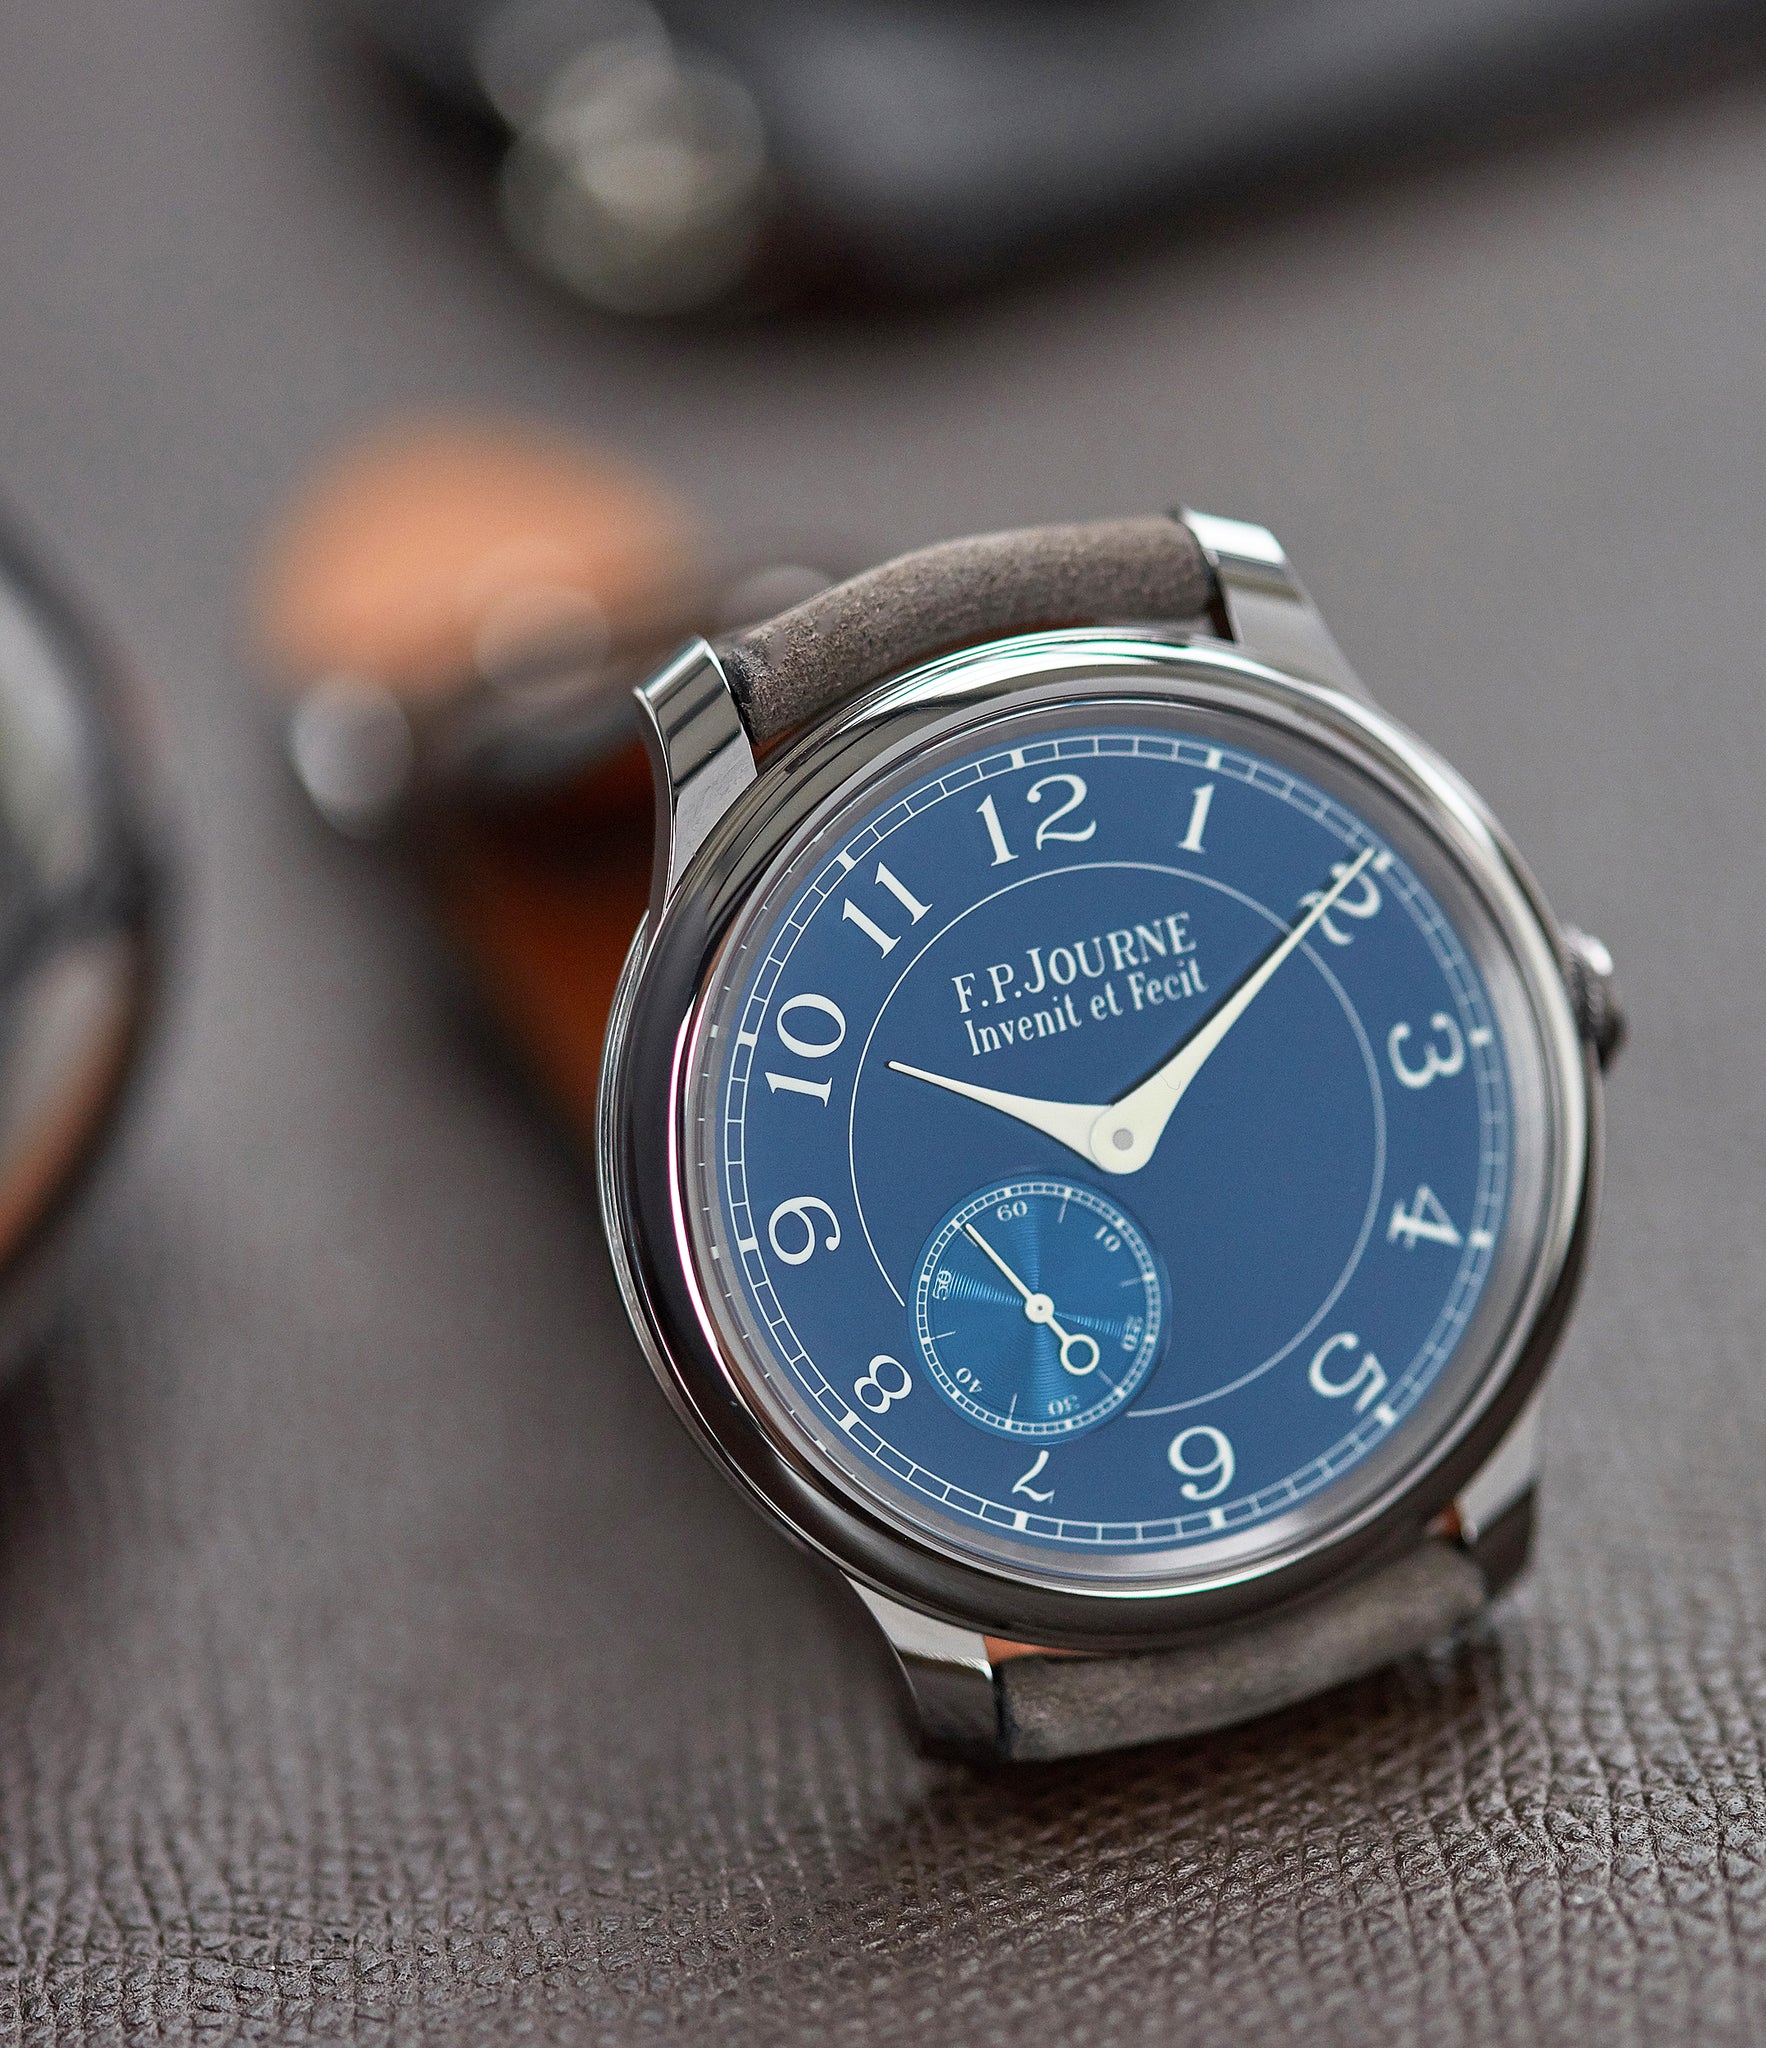 Journe Chronometre Bleu tantalum blue dial rare dress watch for sale online at A Collected Man London approved reseller of independent watchmakers